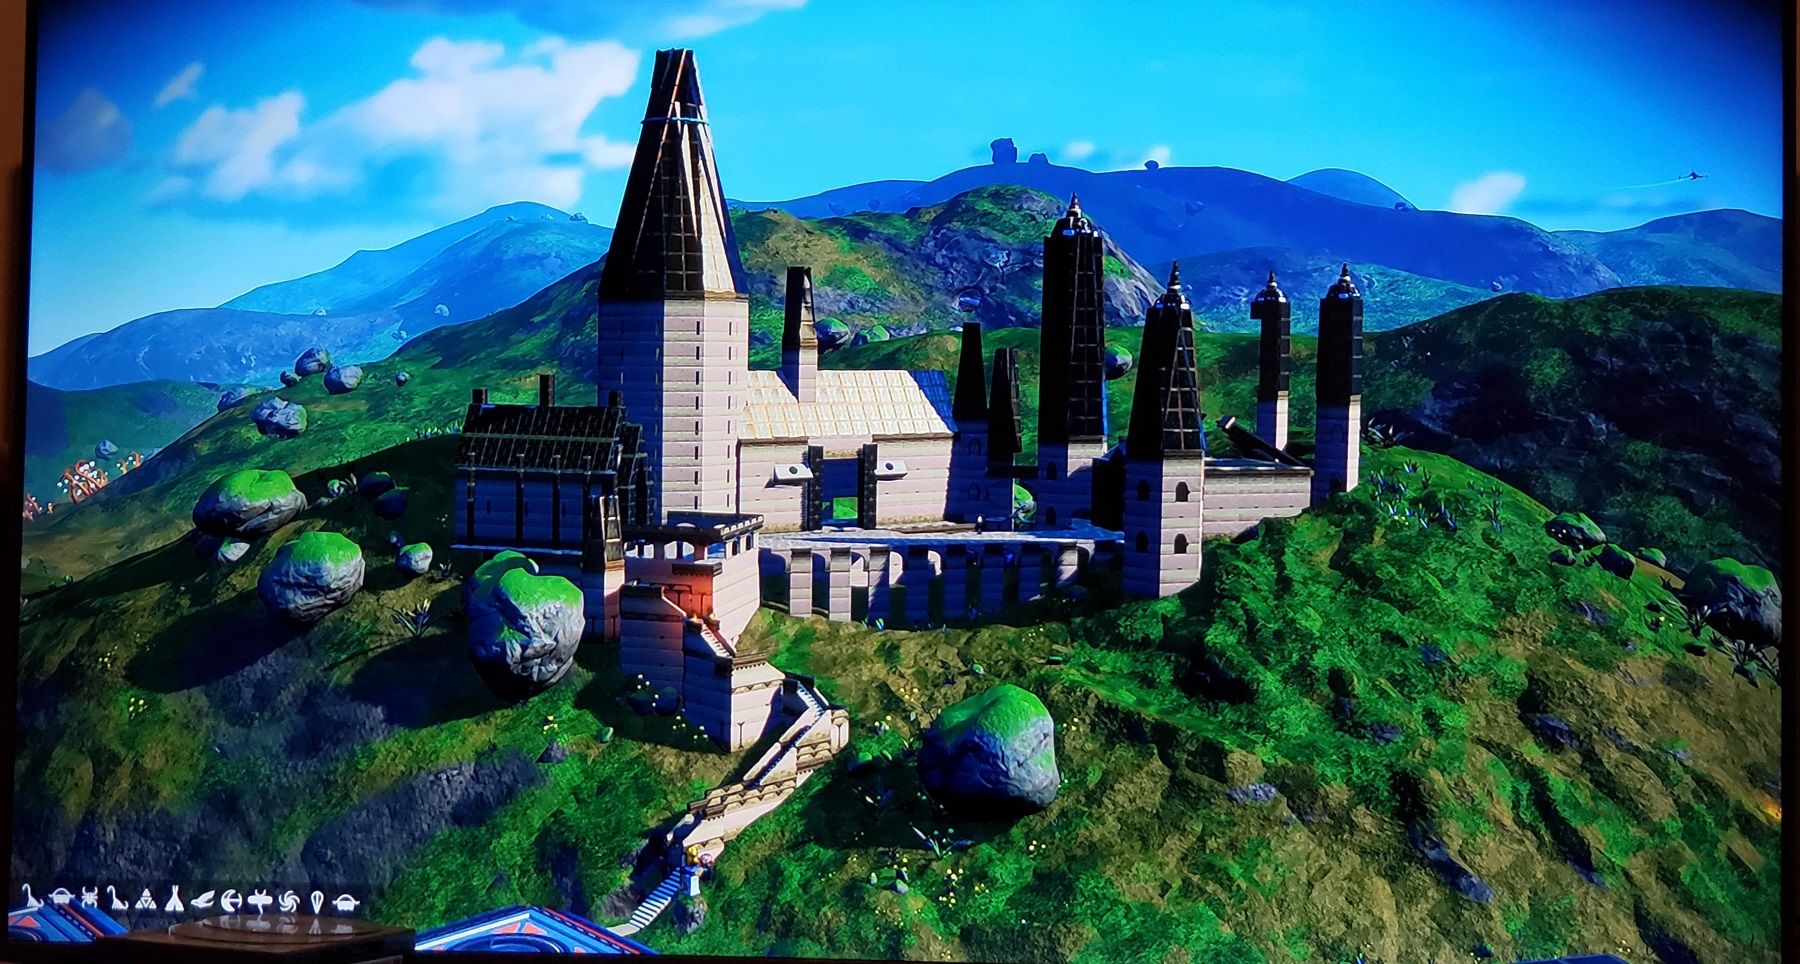 Image from No Man's Sky showing Hogwarts from Harry Potter ontop of a lush green hill.